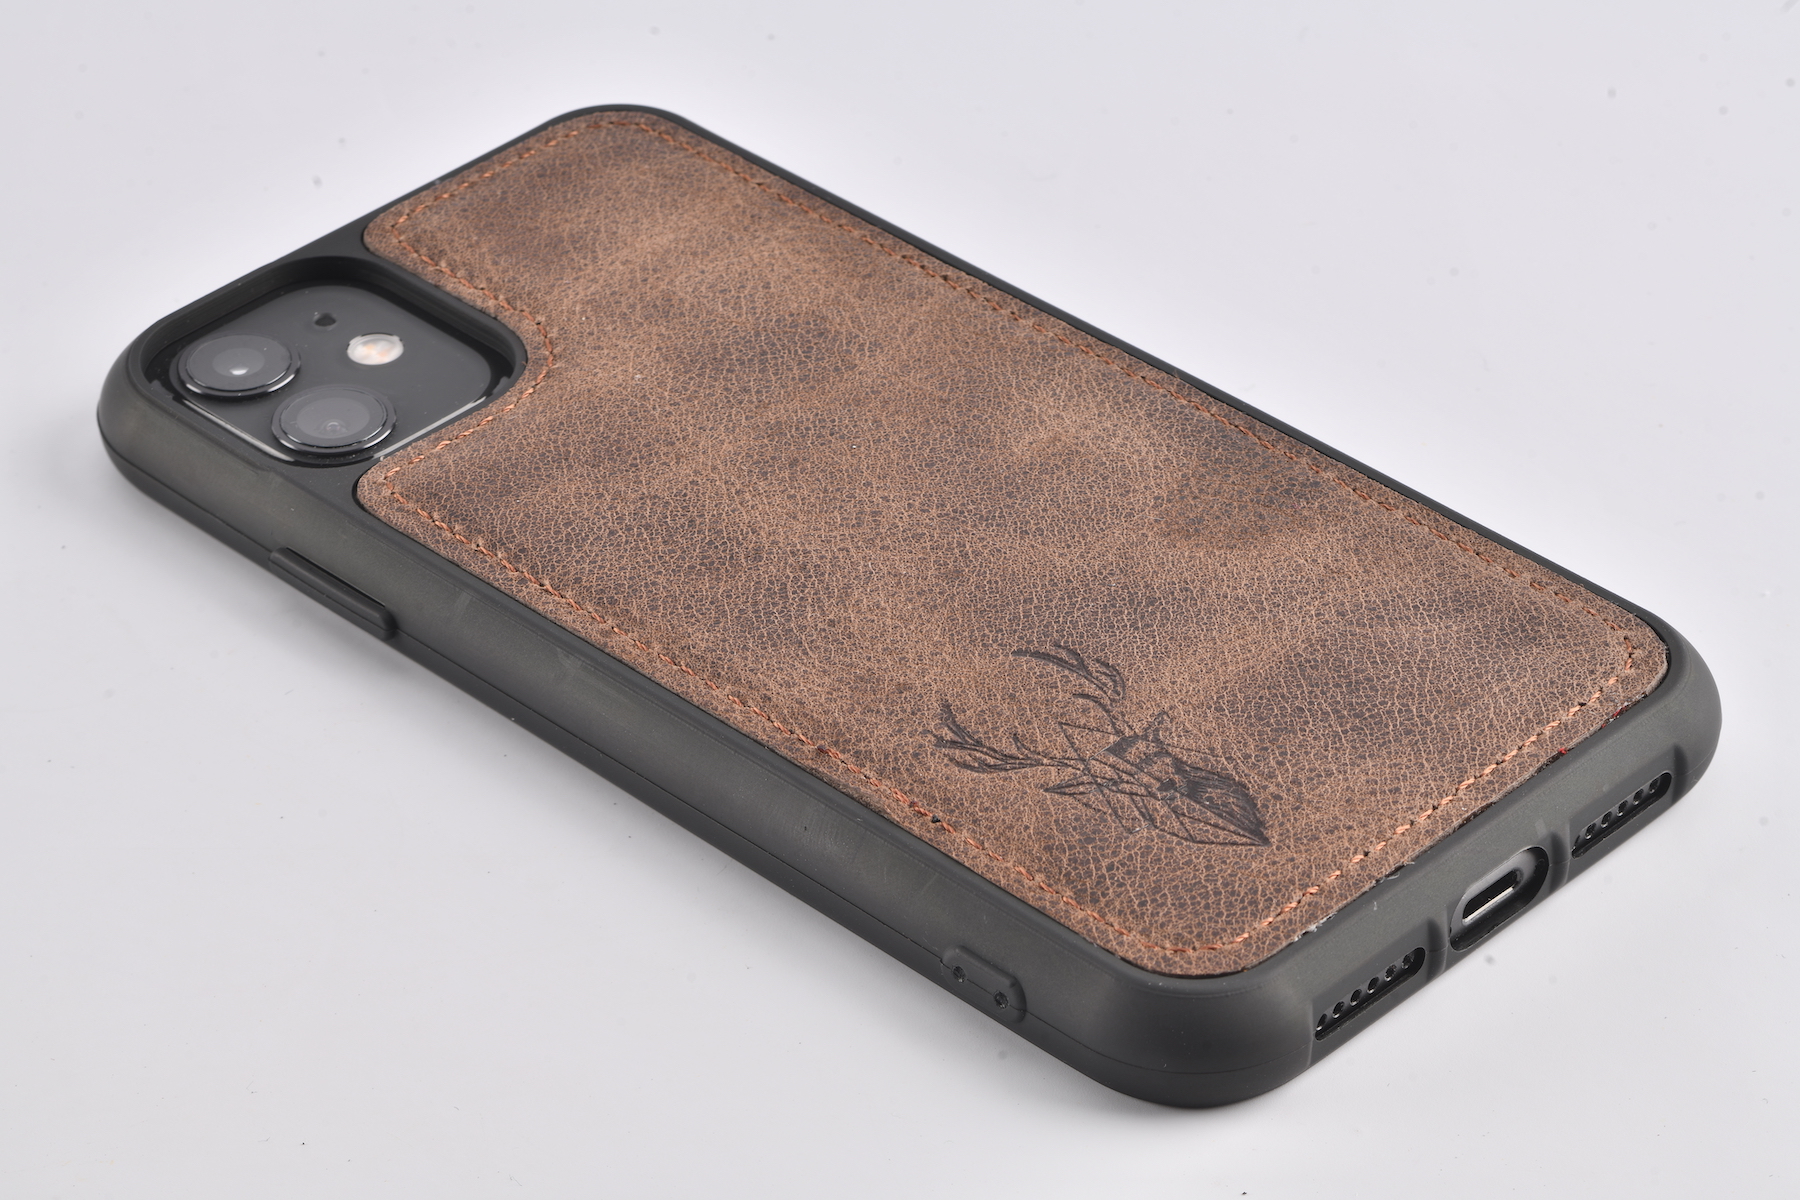 iPhone 11 Pro Case - Chocolate Brown